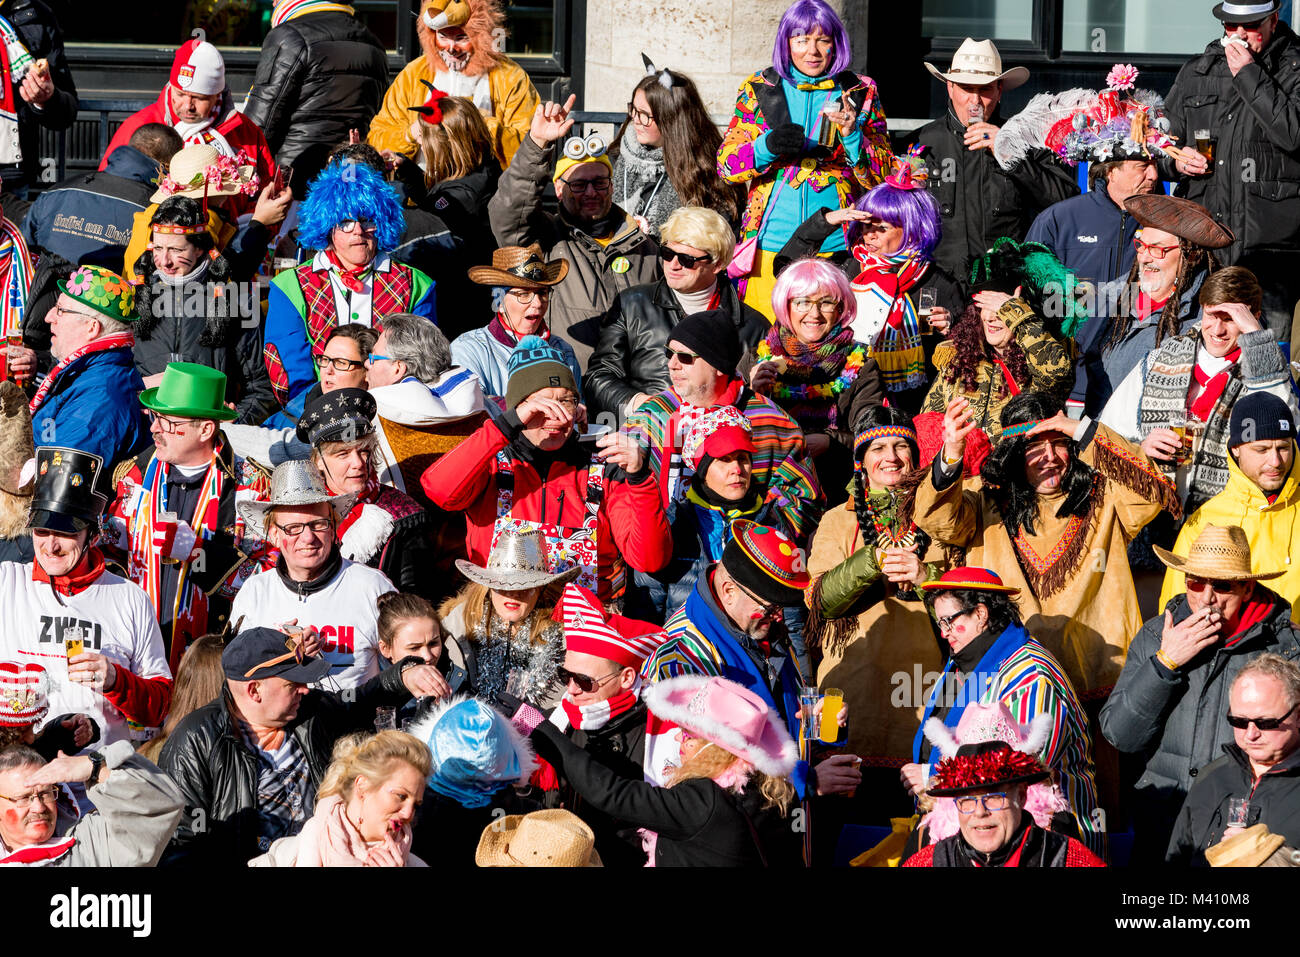 COLOGNE, GERMANY - FEBRUARY 12, 2018: People at a carnival in Cologne, Germany on February 12, 2018 Stock Photo